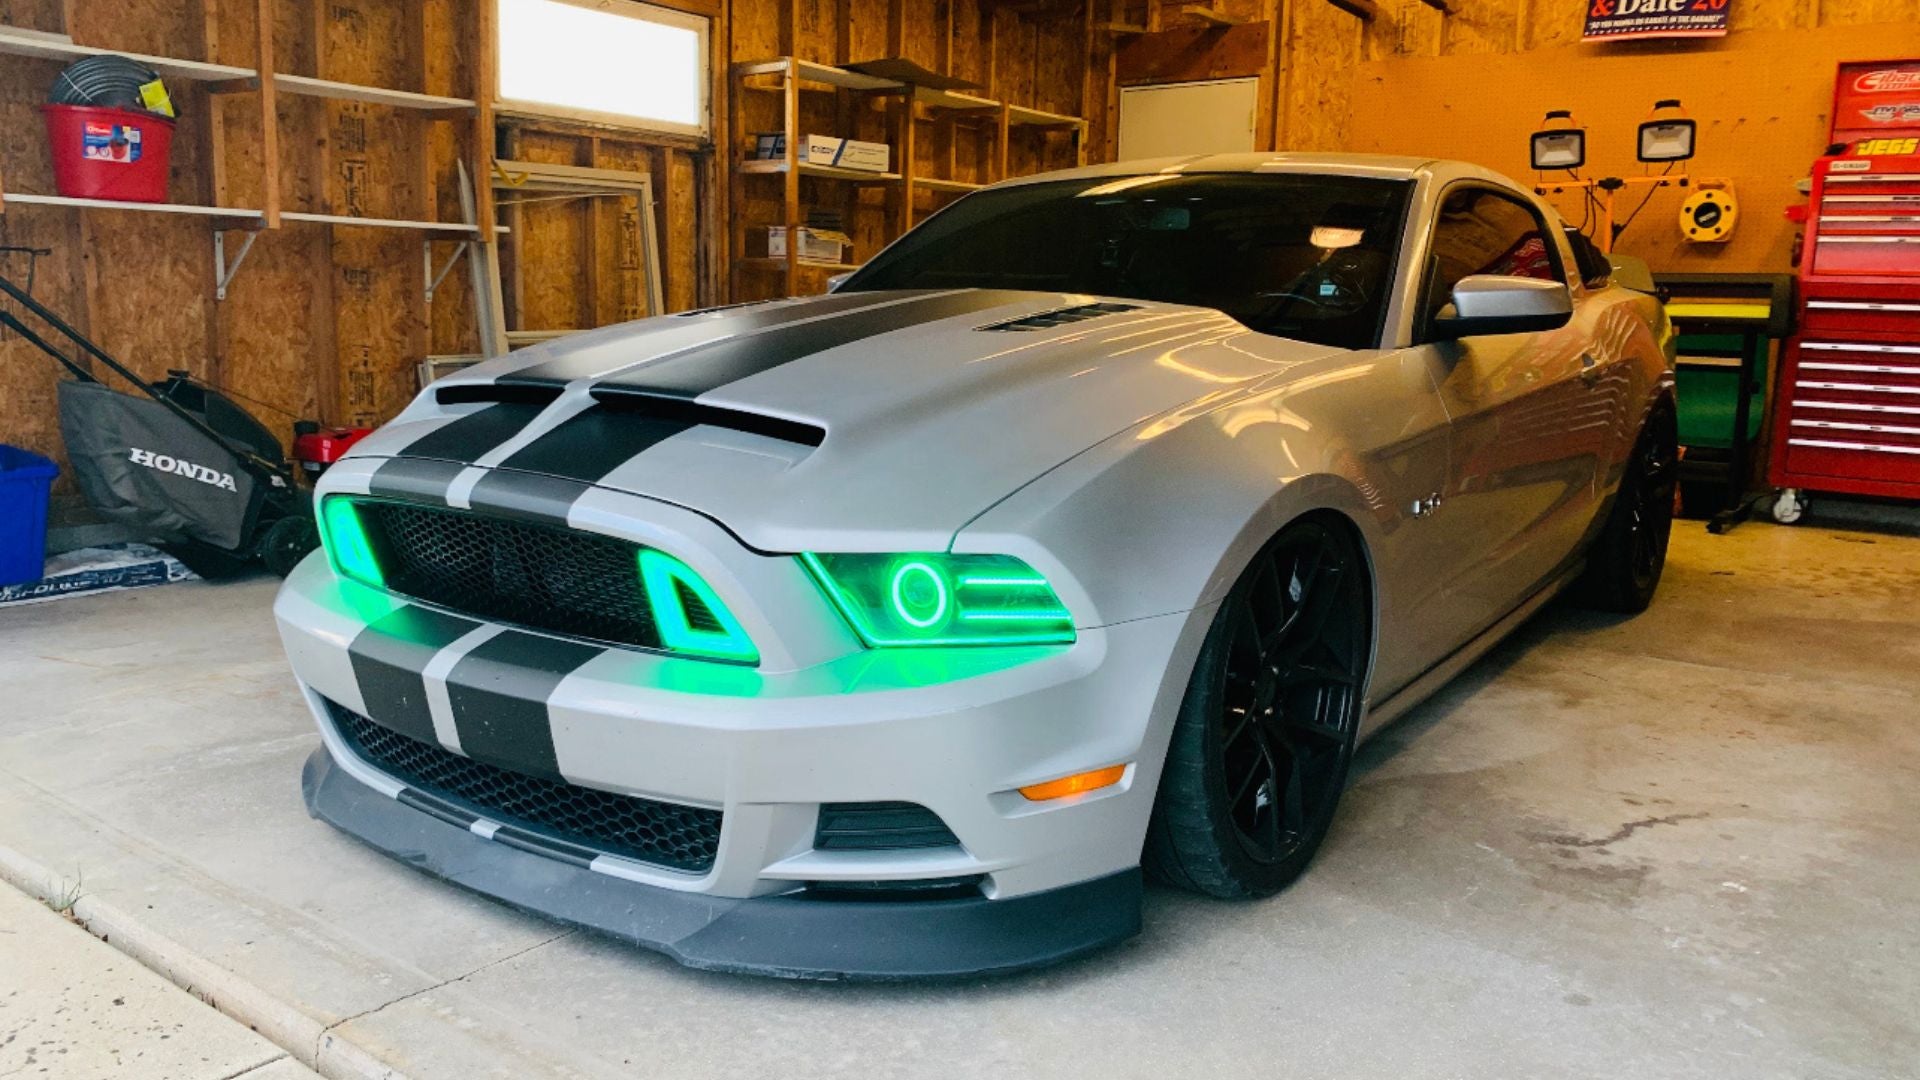 DIY Installation Guide for Aftermarket Light Upgrades on Ford Mustangs